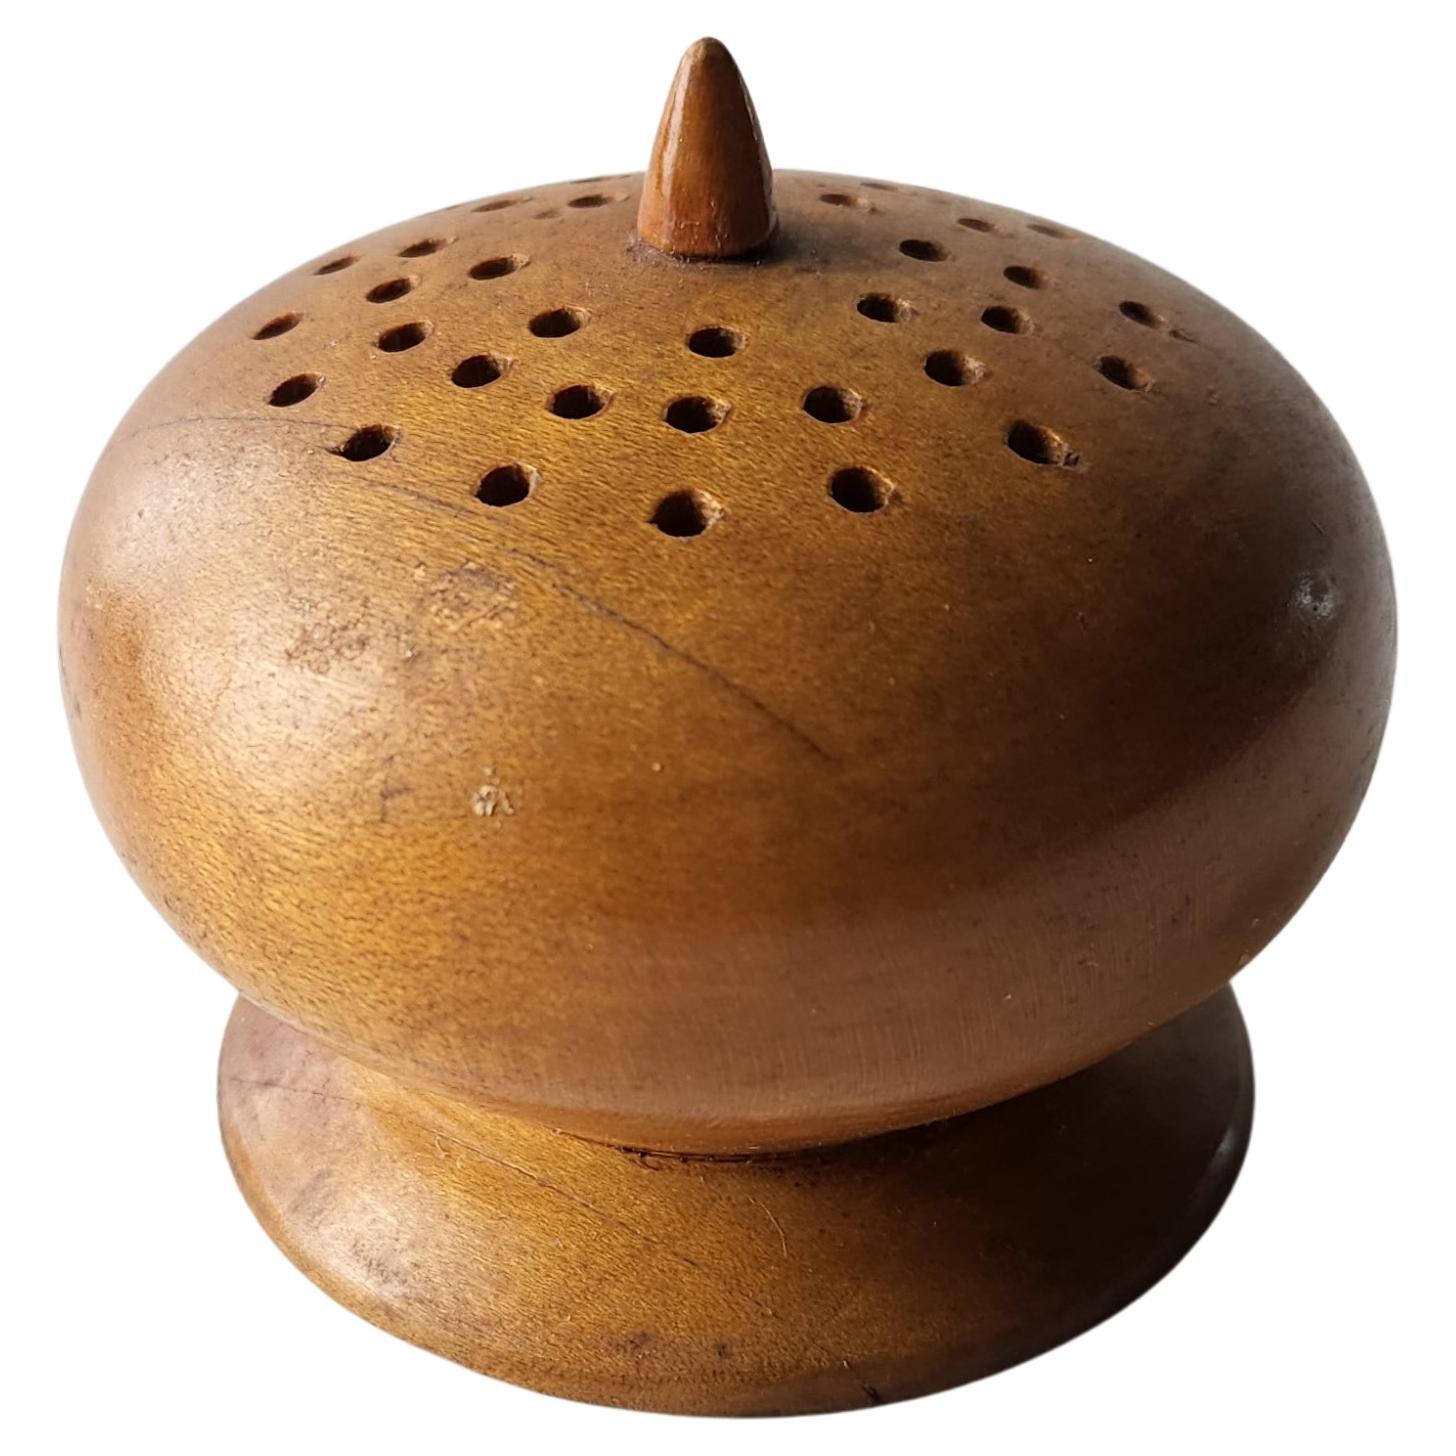 We presents
Hors d’oeuvre appetizer wood toothpick holder atomic sputnik Modern 1950s
Ideal Mid-Century Modern serving piece for cheese cubes appetizer fun!
approximately: 3.5 tall x 4 inches diameter.
Preowned unrestored original vintage